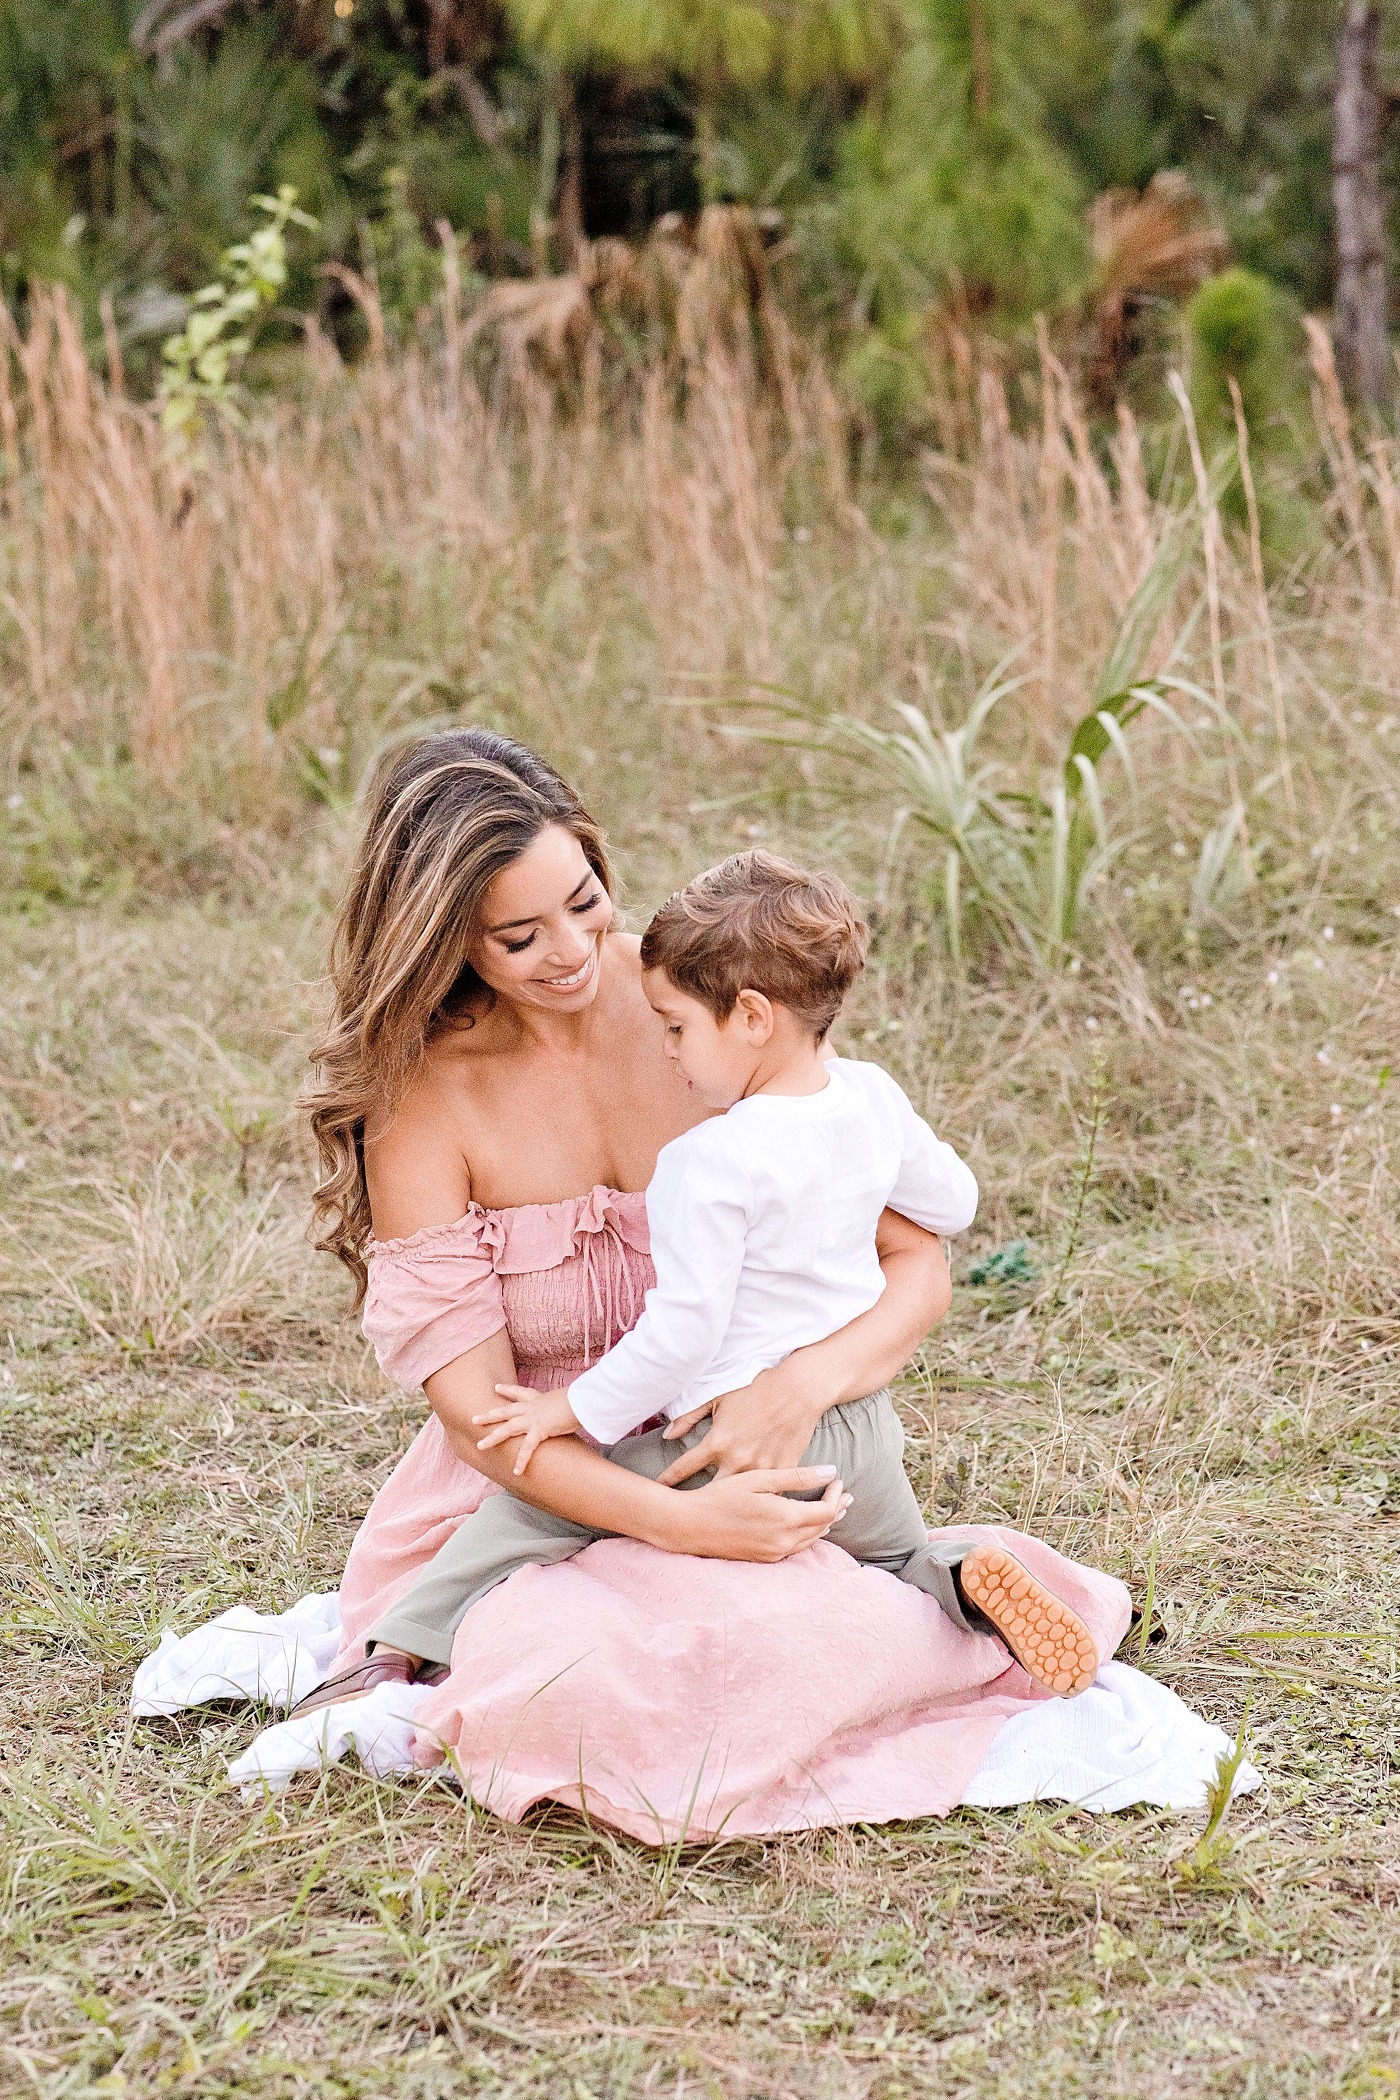 Mom and son cuddle in Miami field. Photo by Ivanna Vidal Photography.